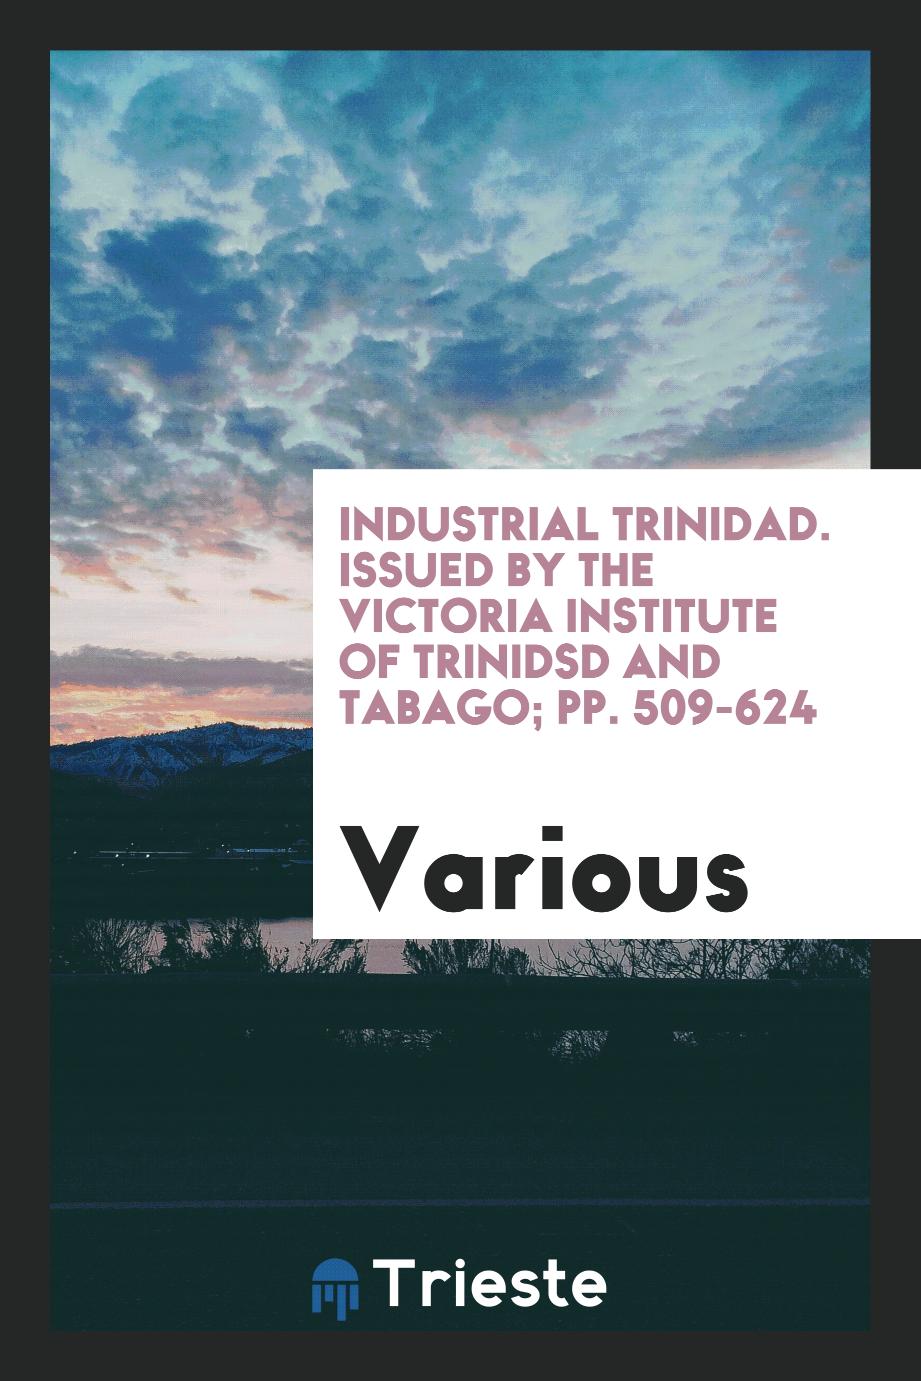 Industrial Trinidad. Issued by the Victoria Institute of Trinidsd and Tabago; pp. 509-624